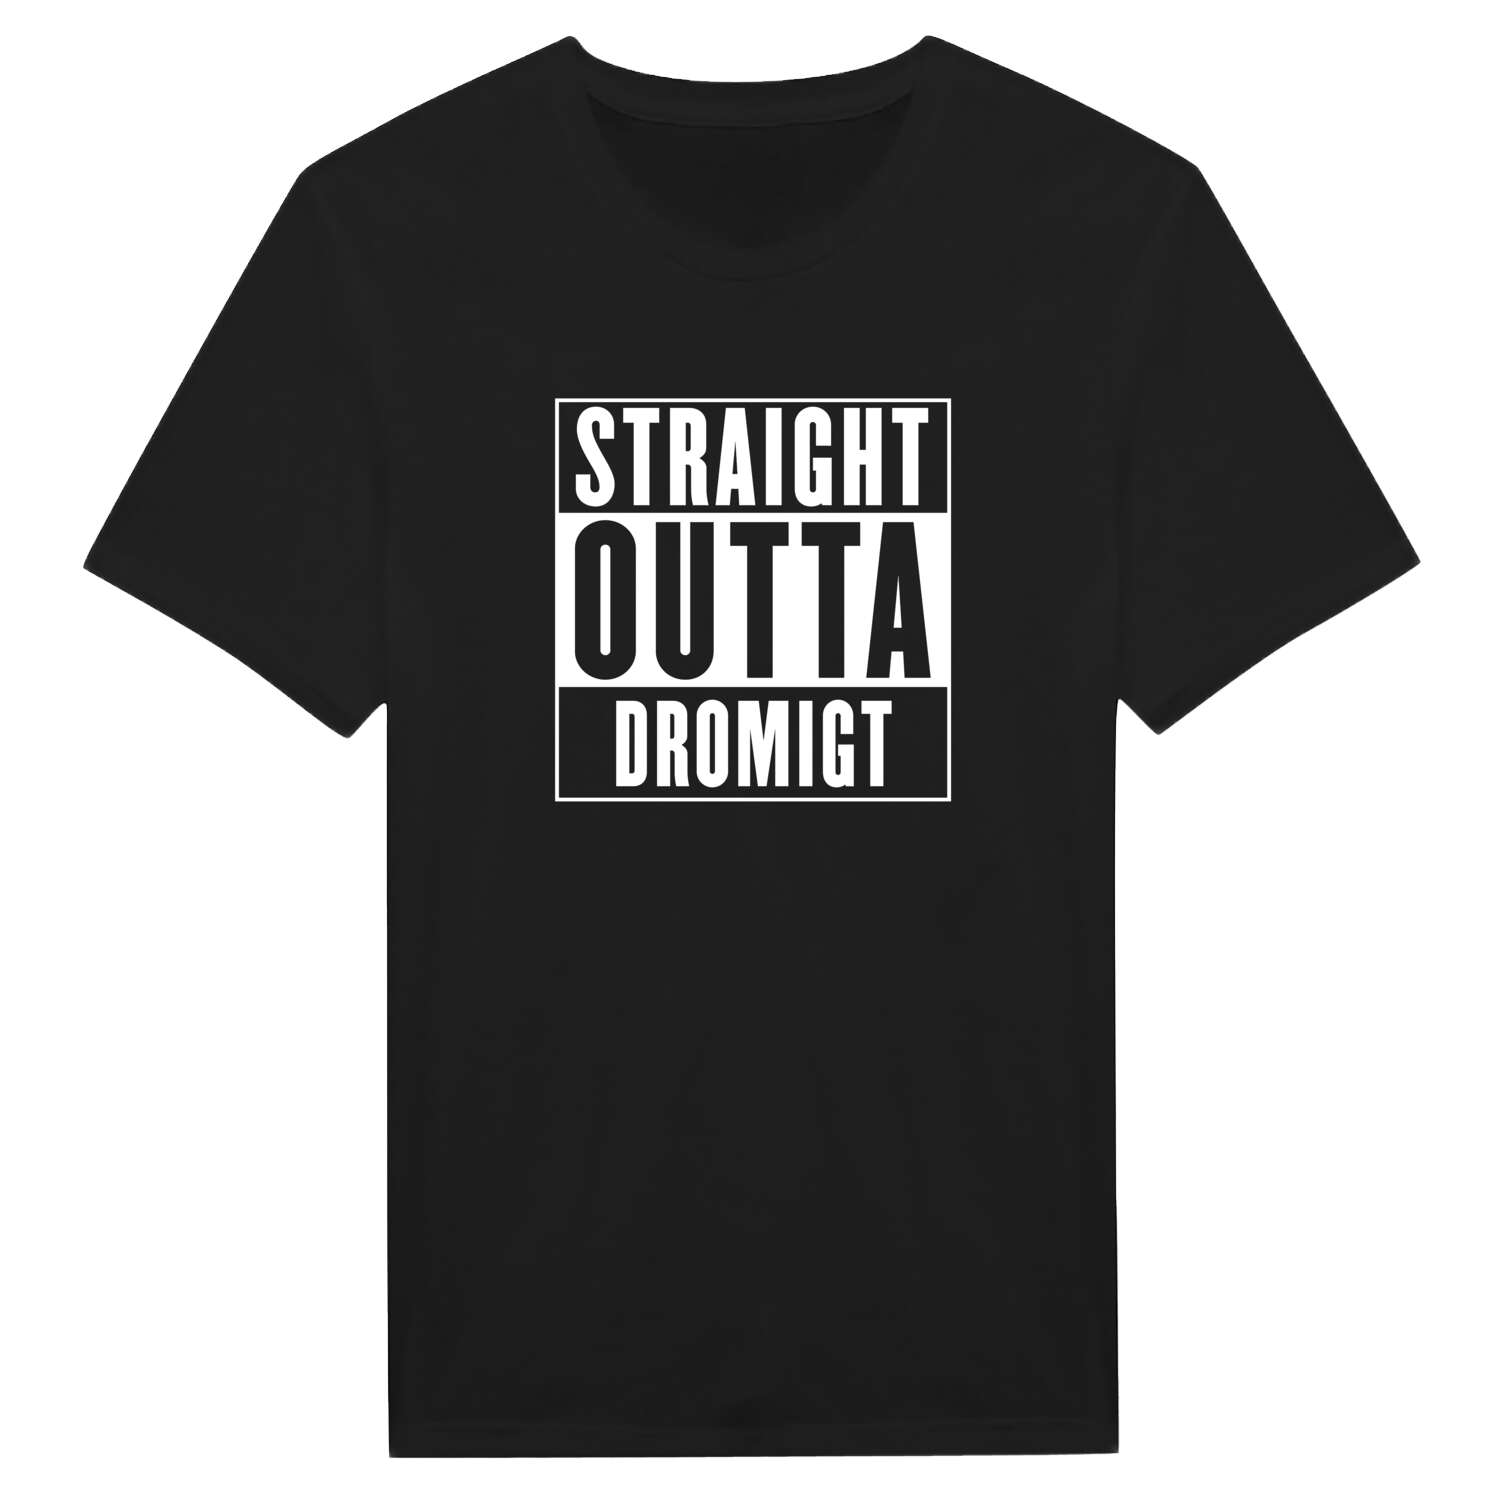 Dromigt T-Shirt »Straight Outta«